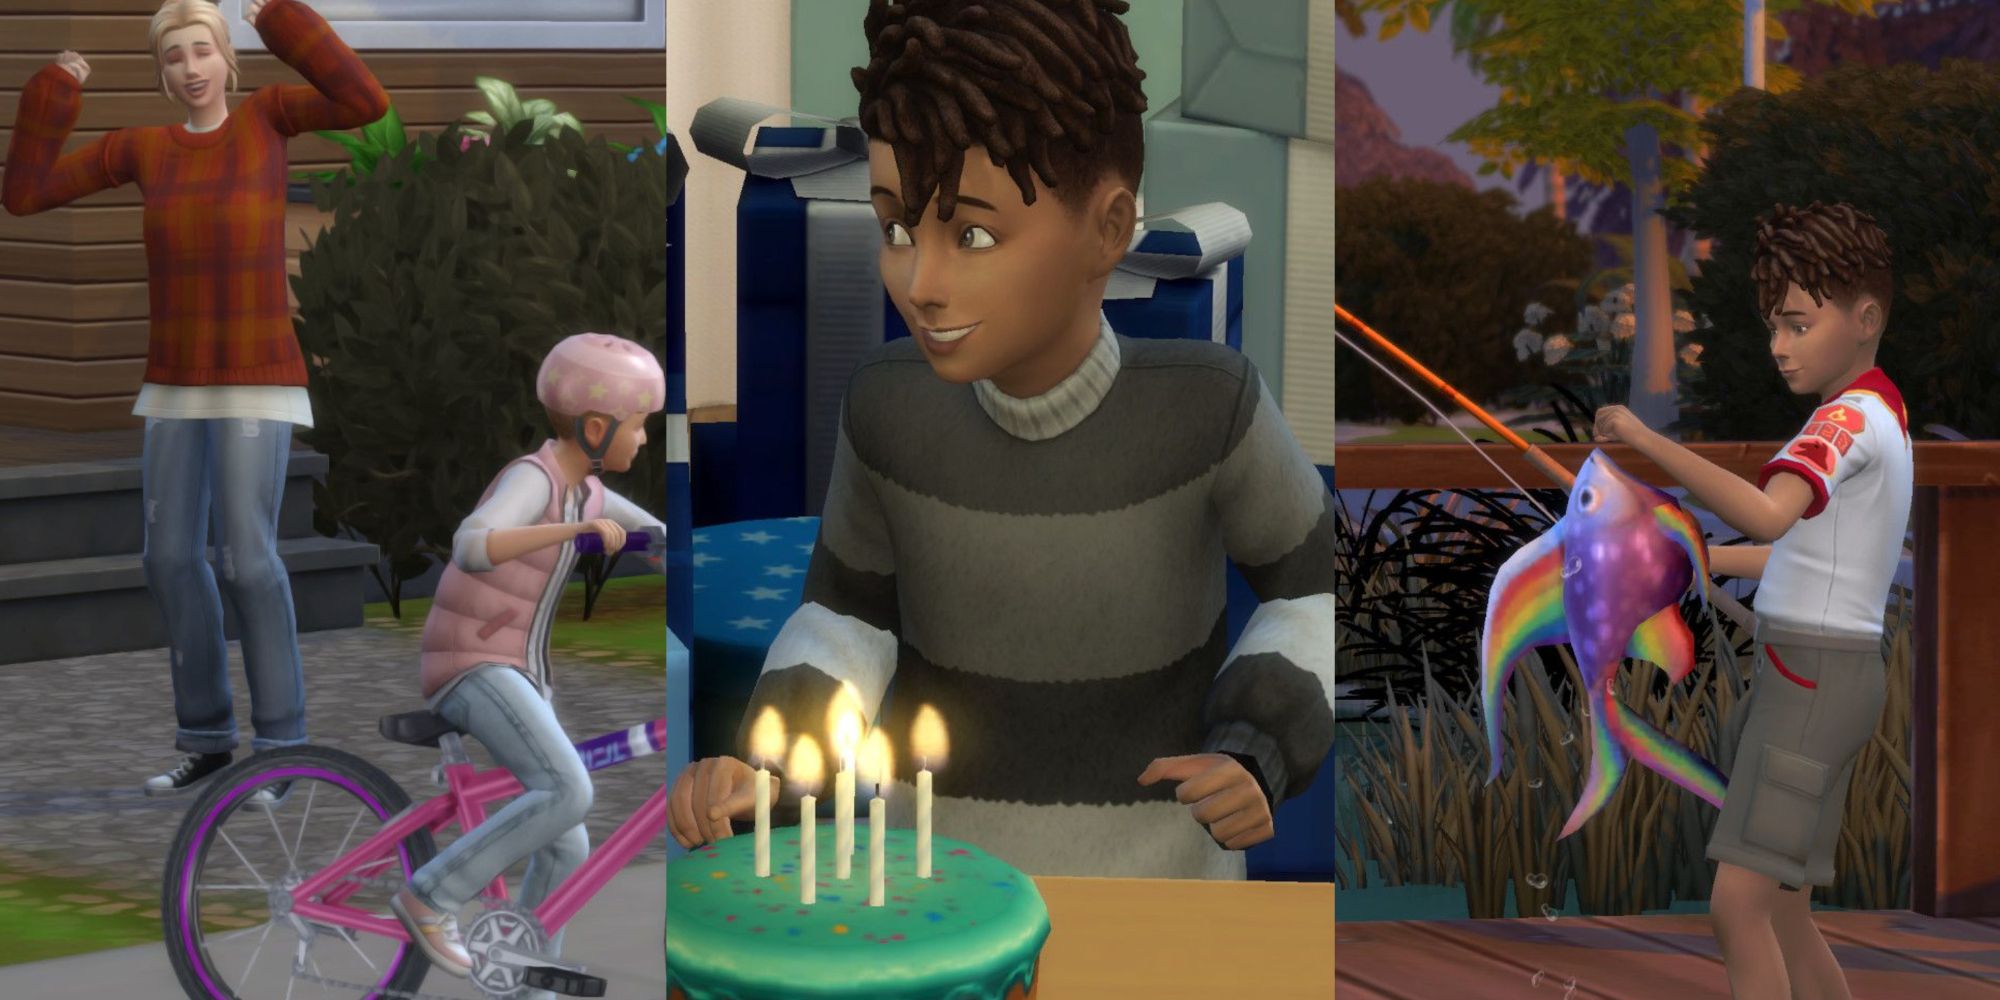 The Sims 4 Growing Together Split Image Of Kids Taking Part In Different Activities